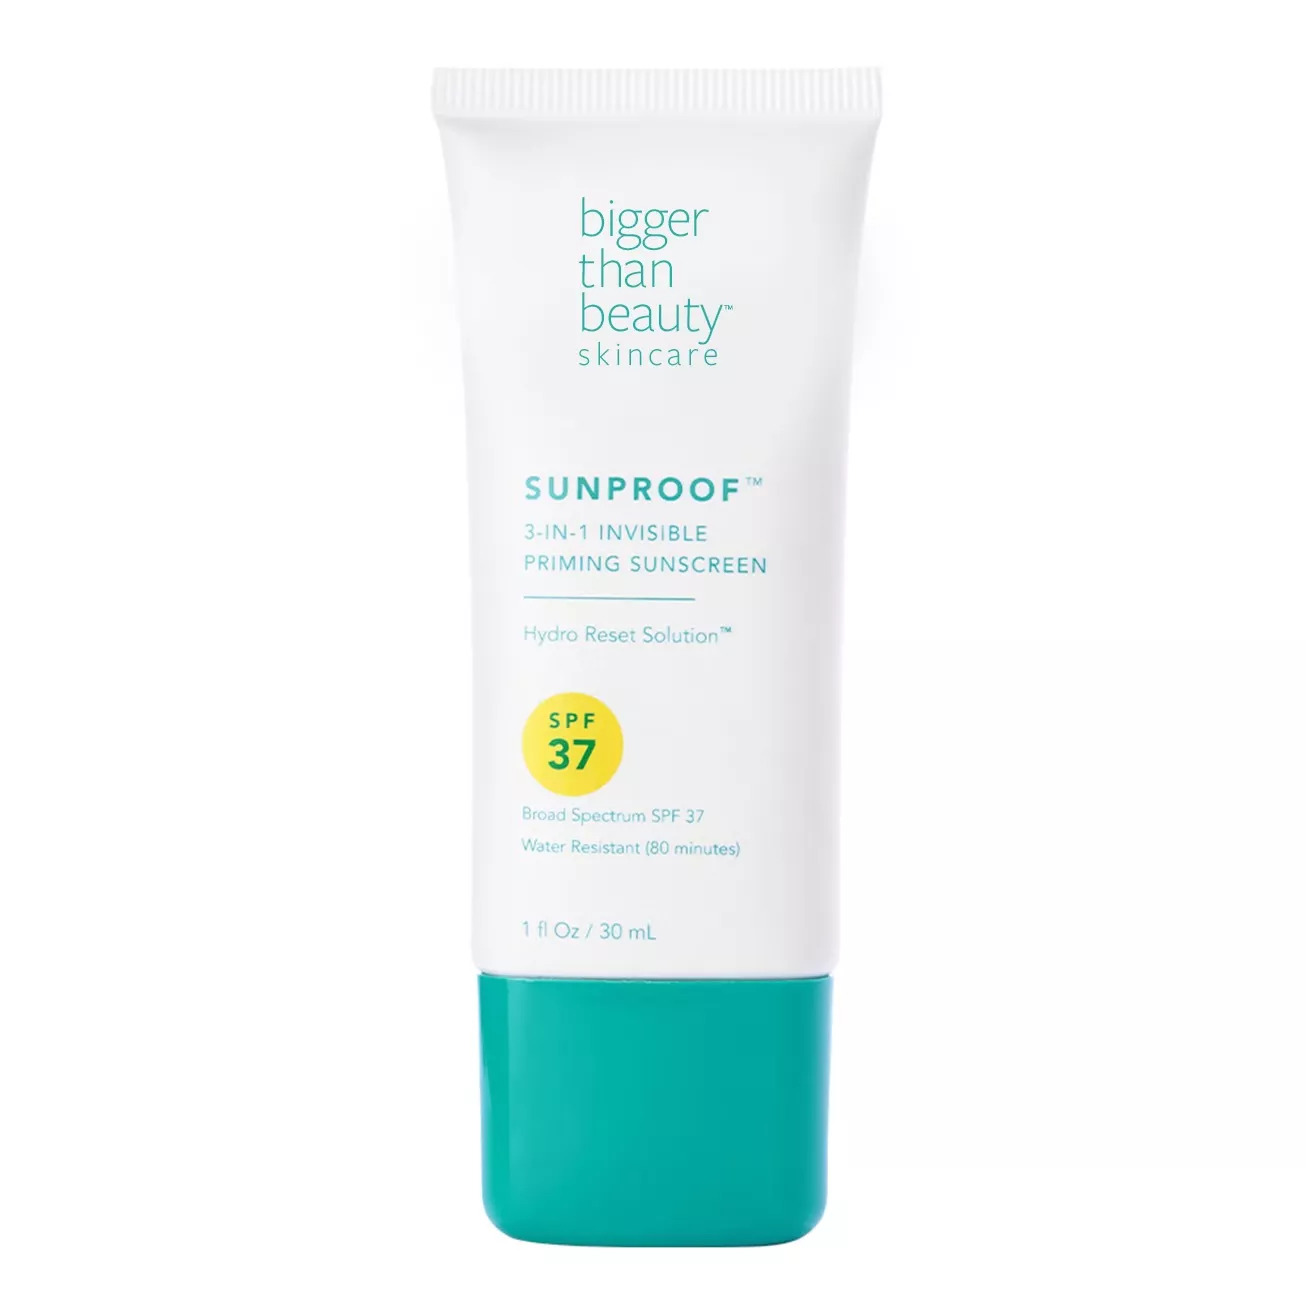 Bigger than Beauty Sunproof 3-in-1 Invisible Priming Sunscreen - SPF 37